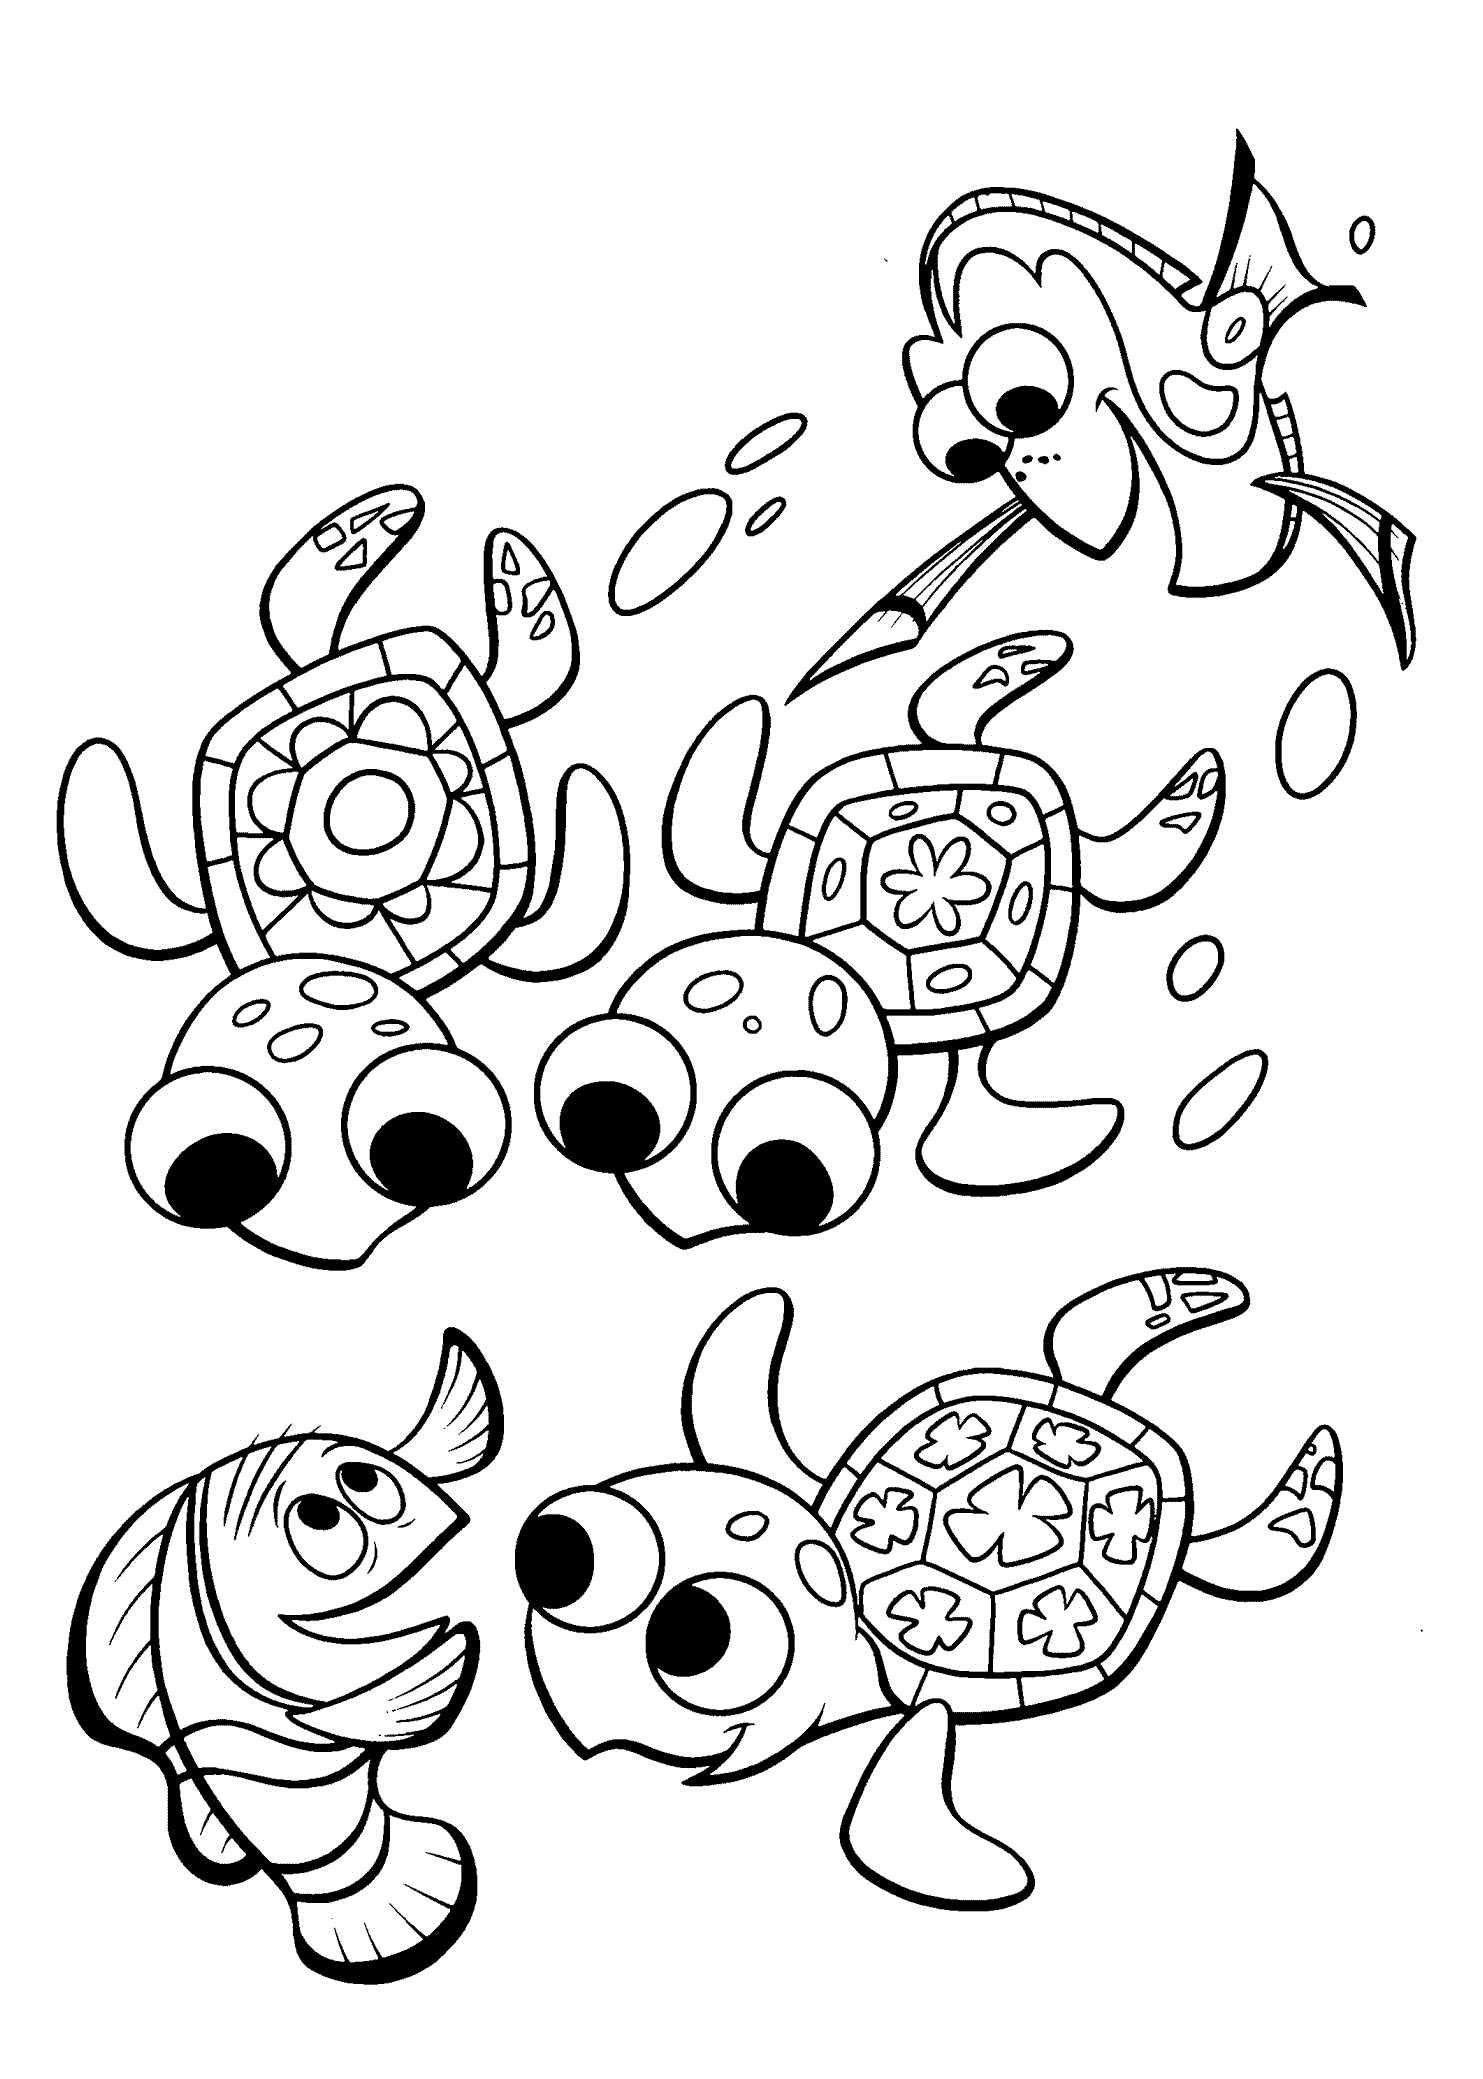 46 Awesome Finding Nemo Coloring Pages - VoteForVerde.com